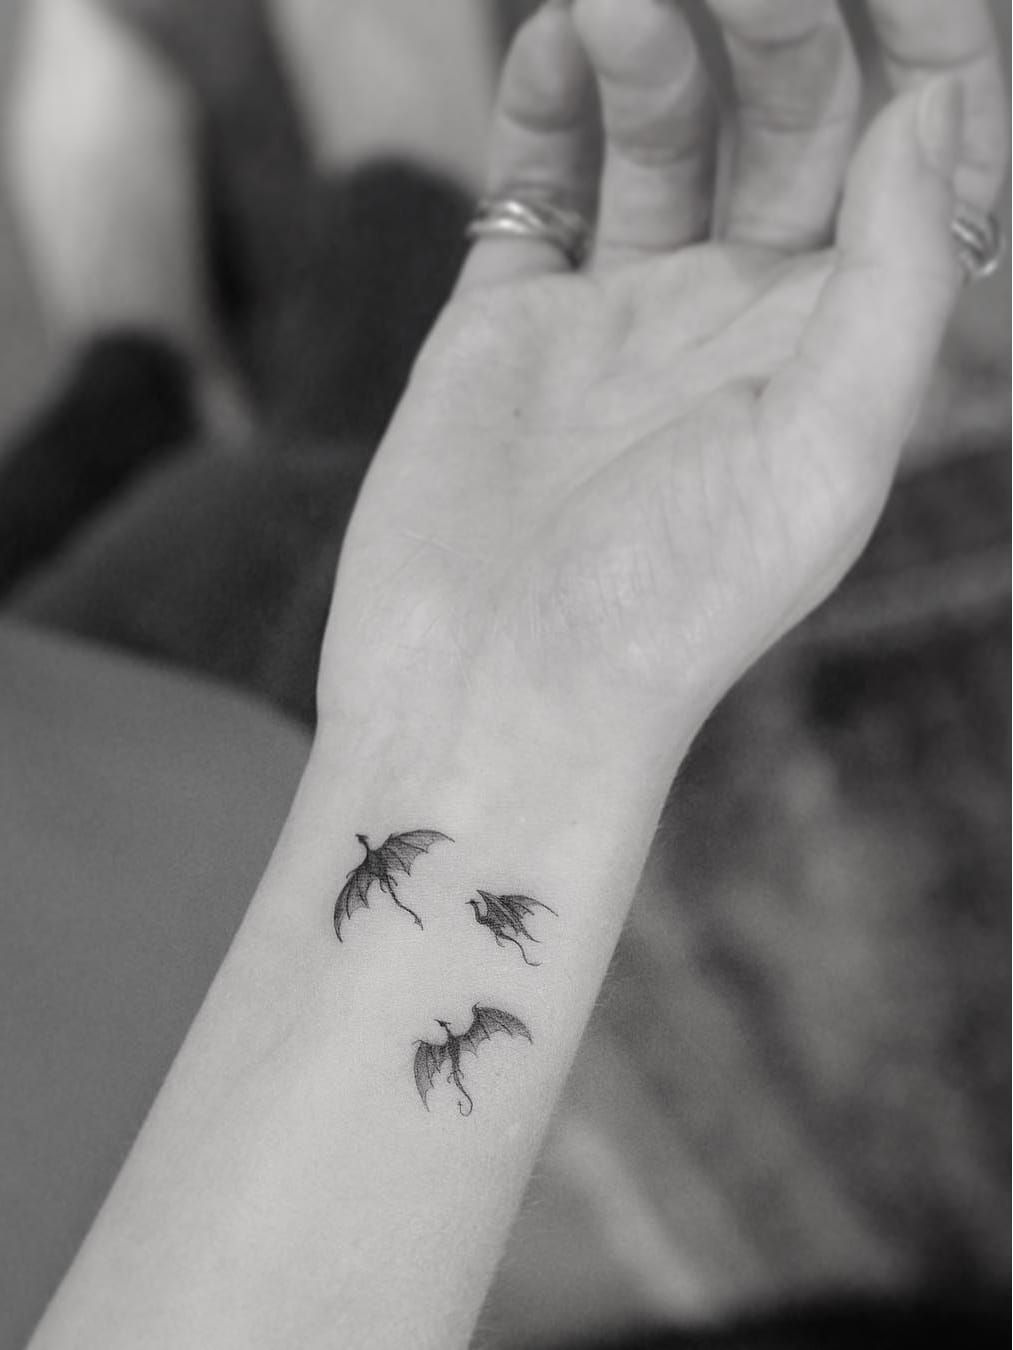 Aggregate more than 67 throne of glass tattoo ideas super hot - in ...